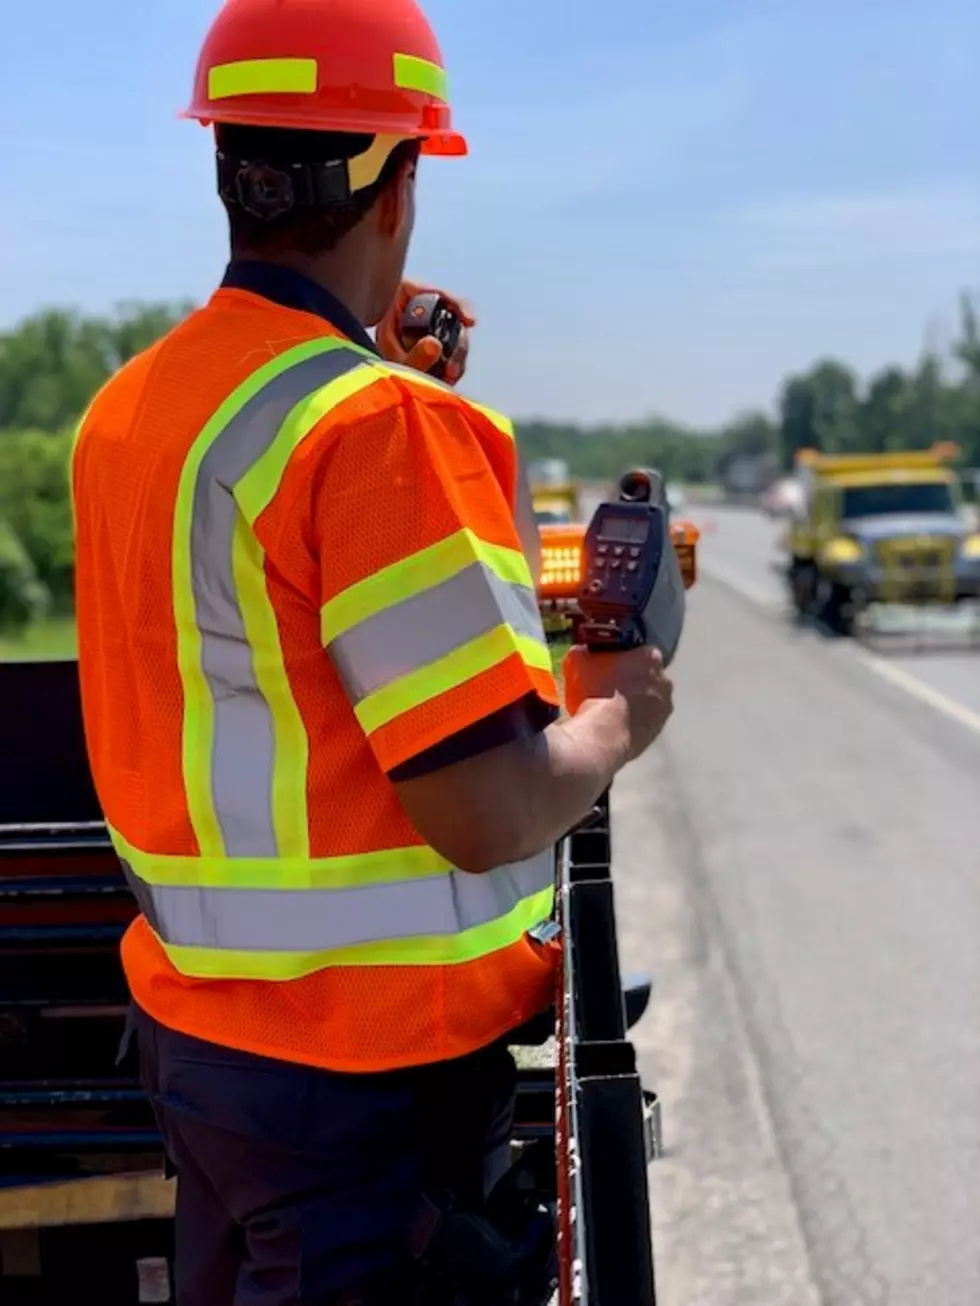 Speeding Through a Work Zone? Operation Hardhat on the Lookout